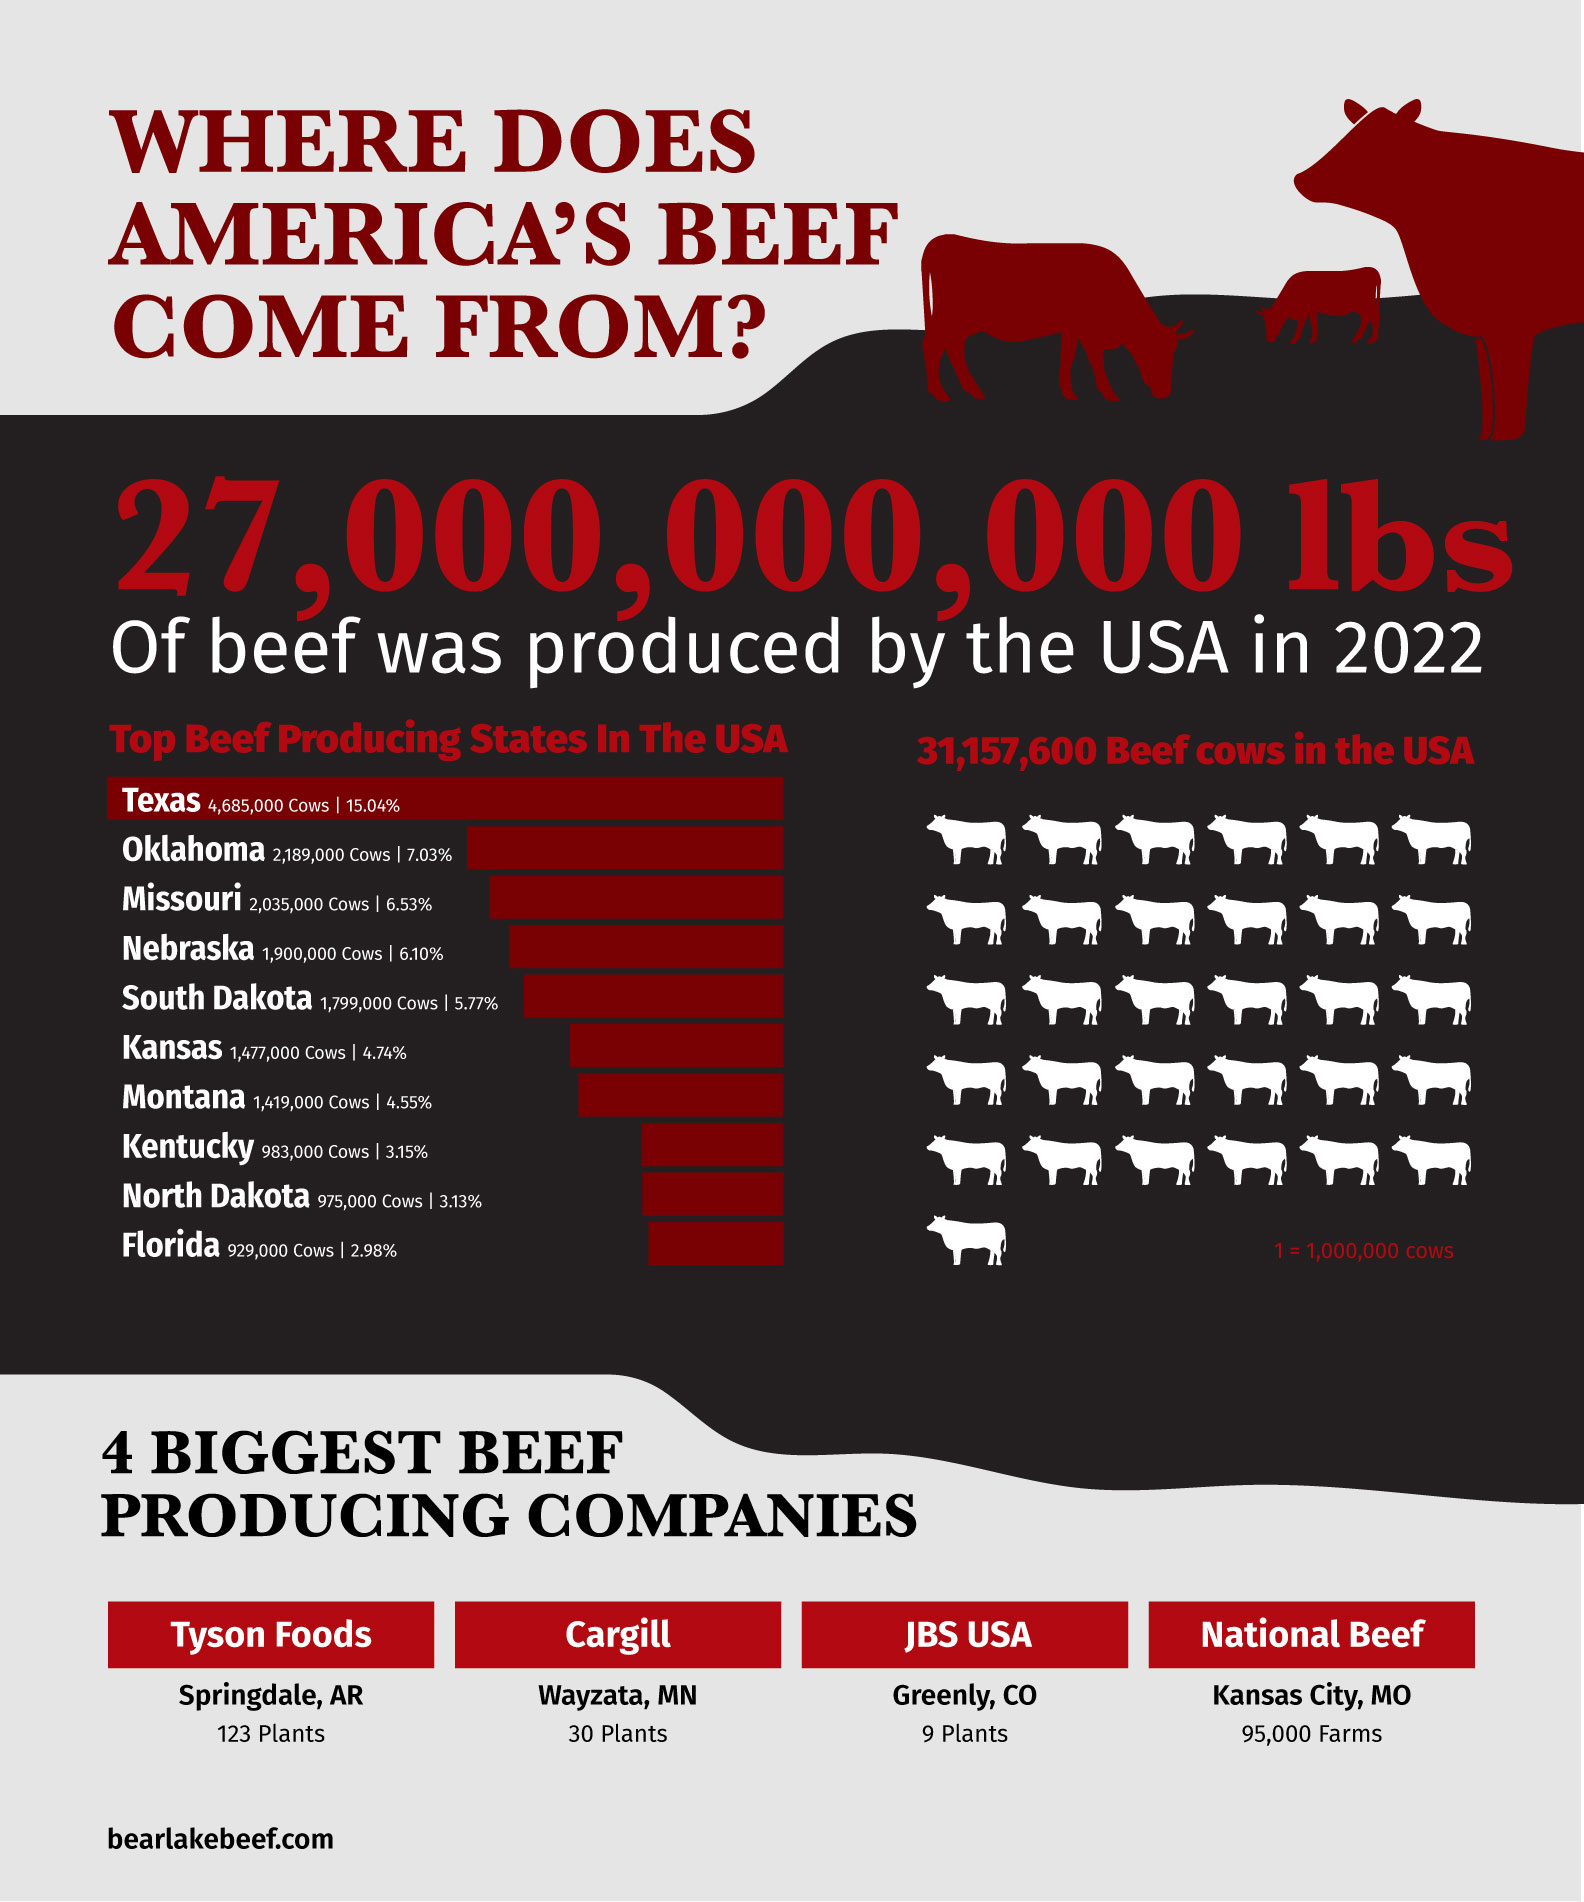 Where Does America’s Beef Come From?